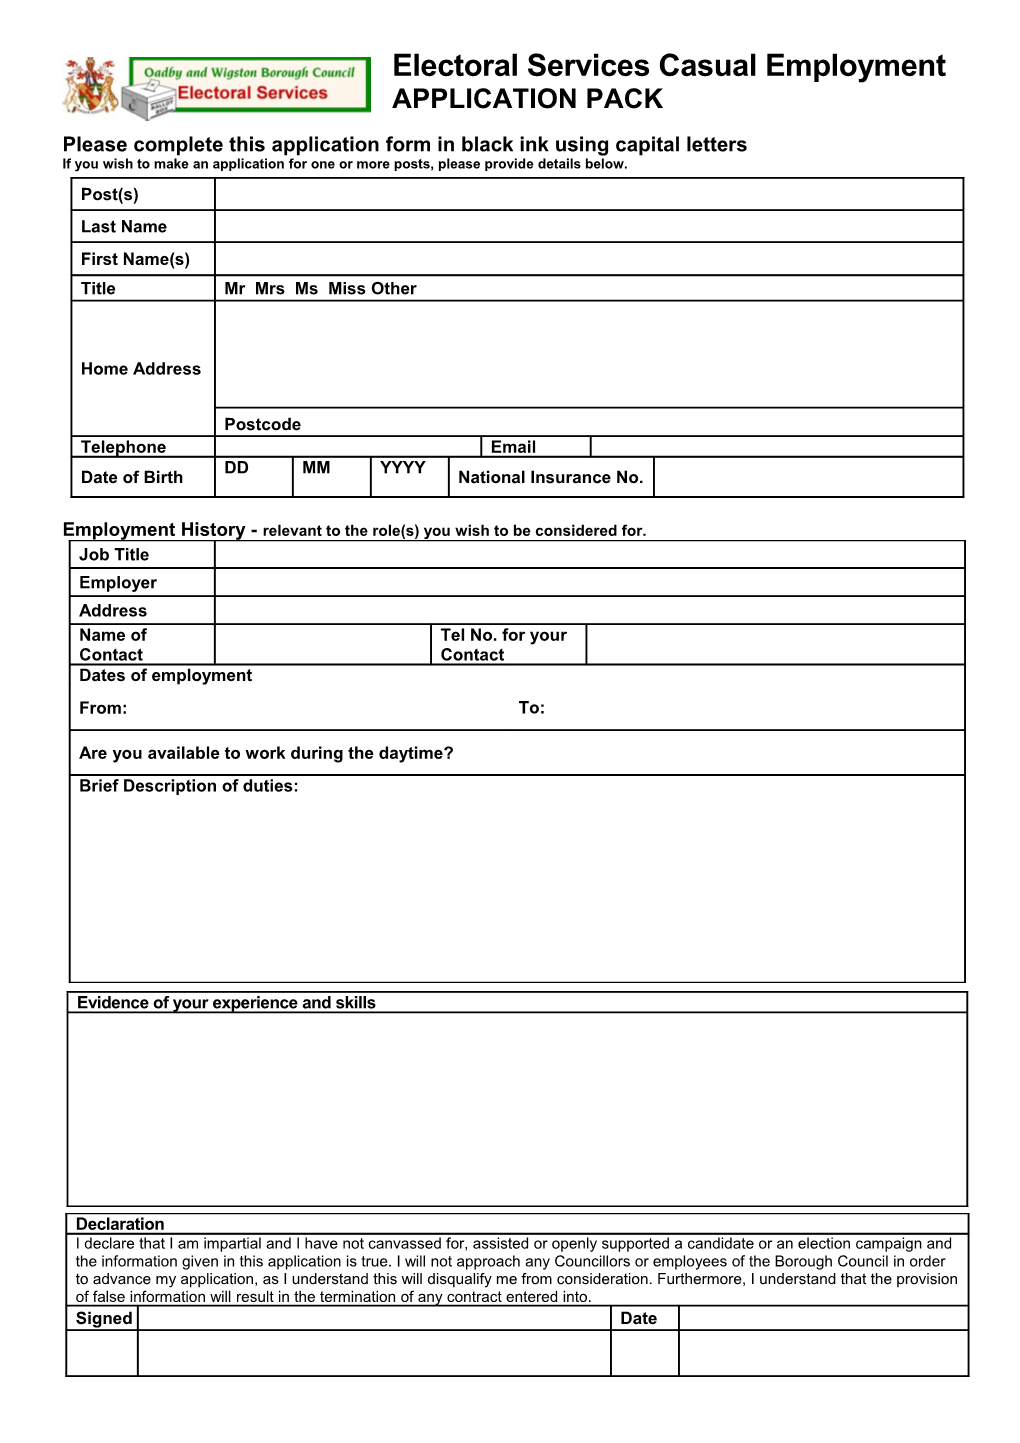 Please Complete This Application Form in Black Ink Using Capital Letters